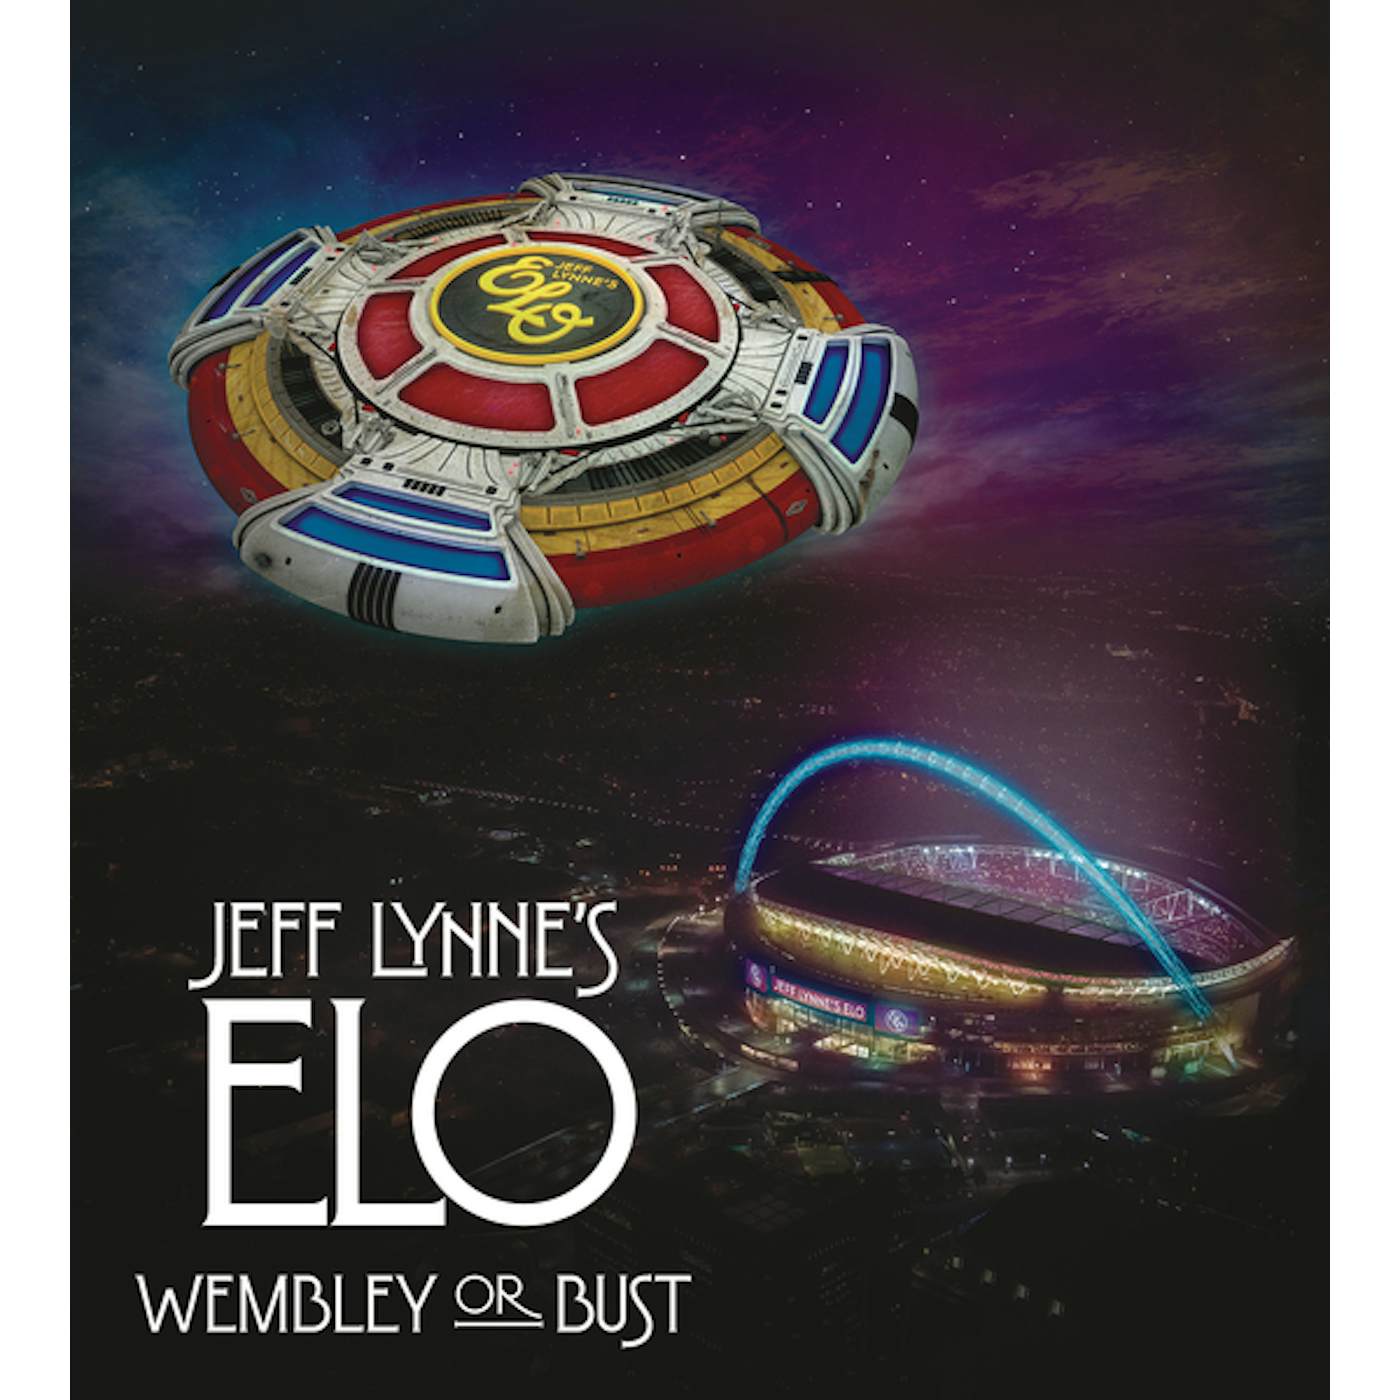 ELO (Electric Light Orchestra) WEMBLEY OR BUST (2 CD/1 BLU-RAY) CD